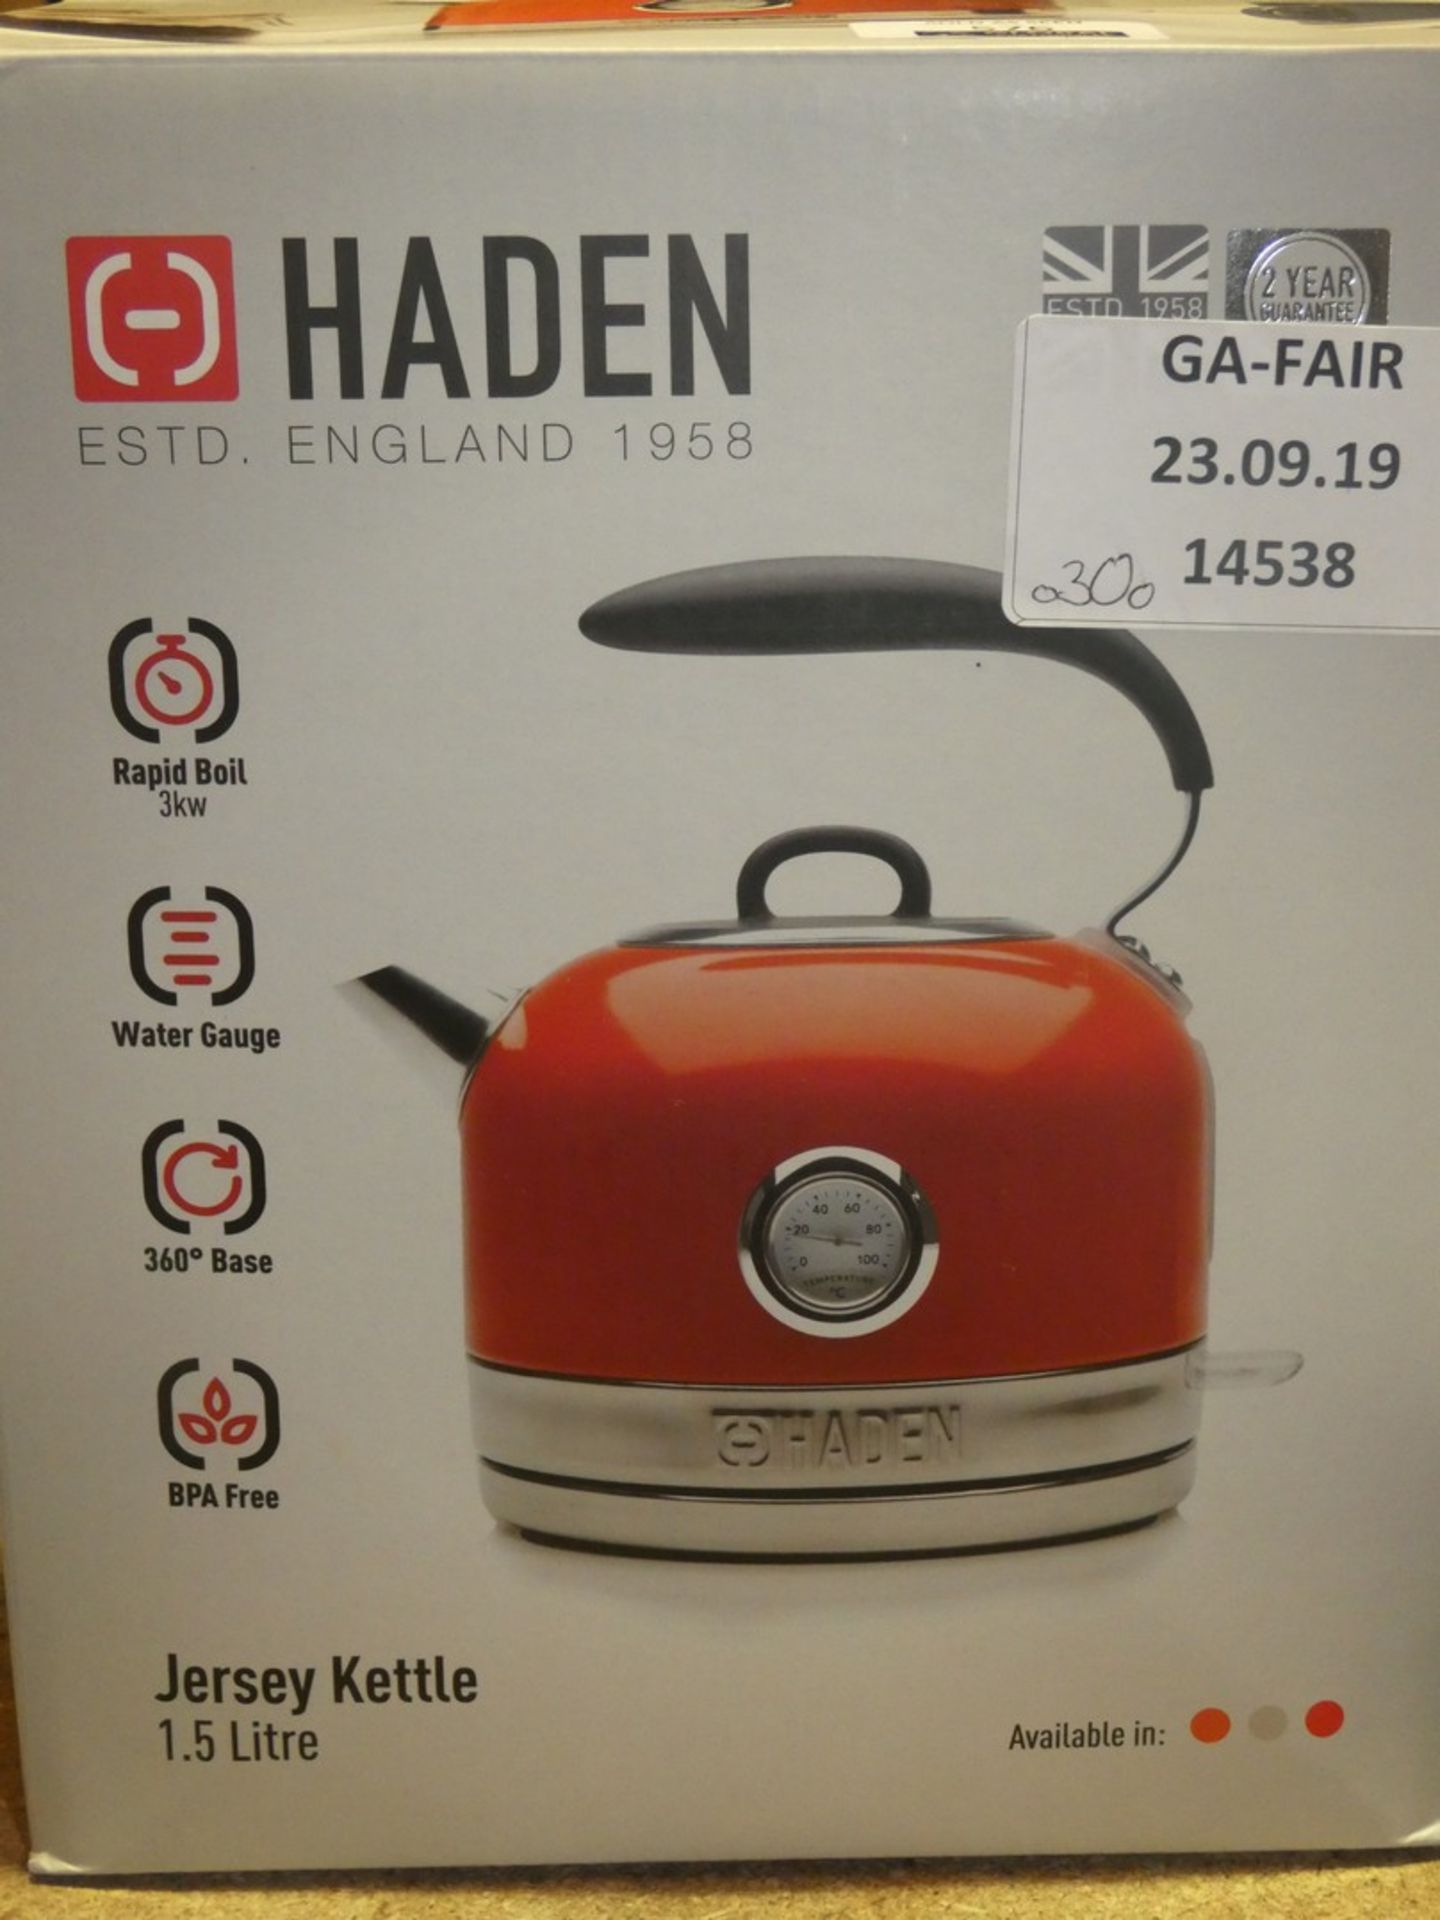 Boxed Haden 1.5L Jersey Red Kettle RRP £30 (14538) (Public Viewing and Appraisals Available)